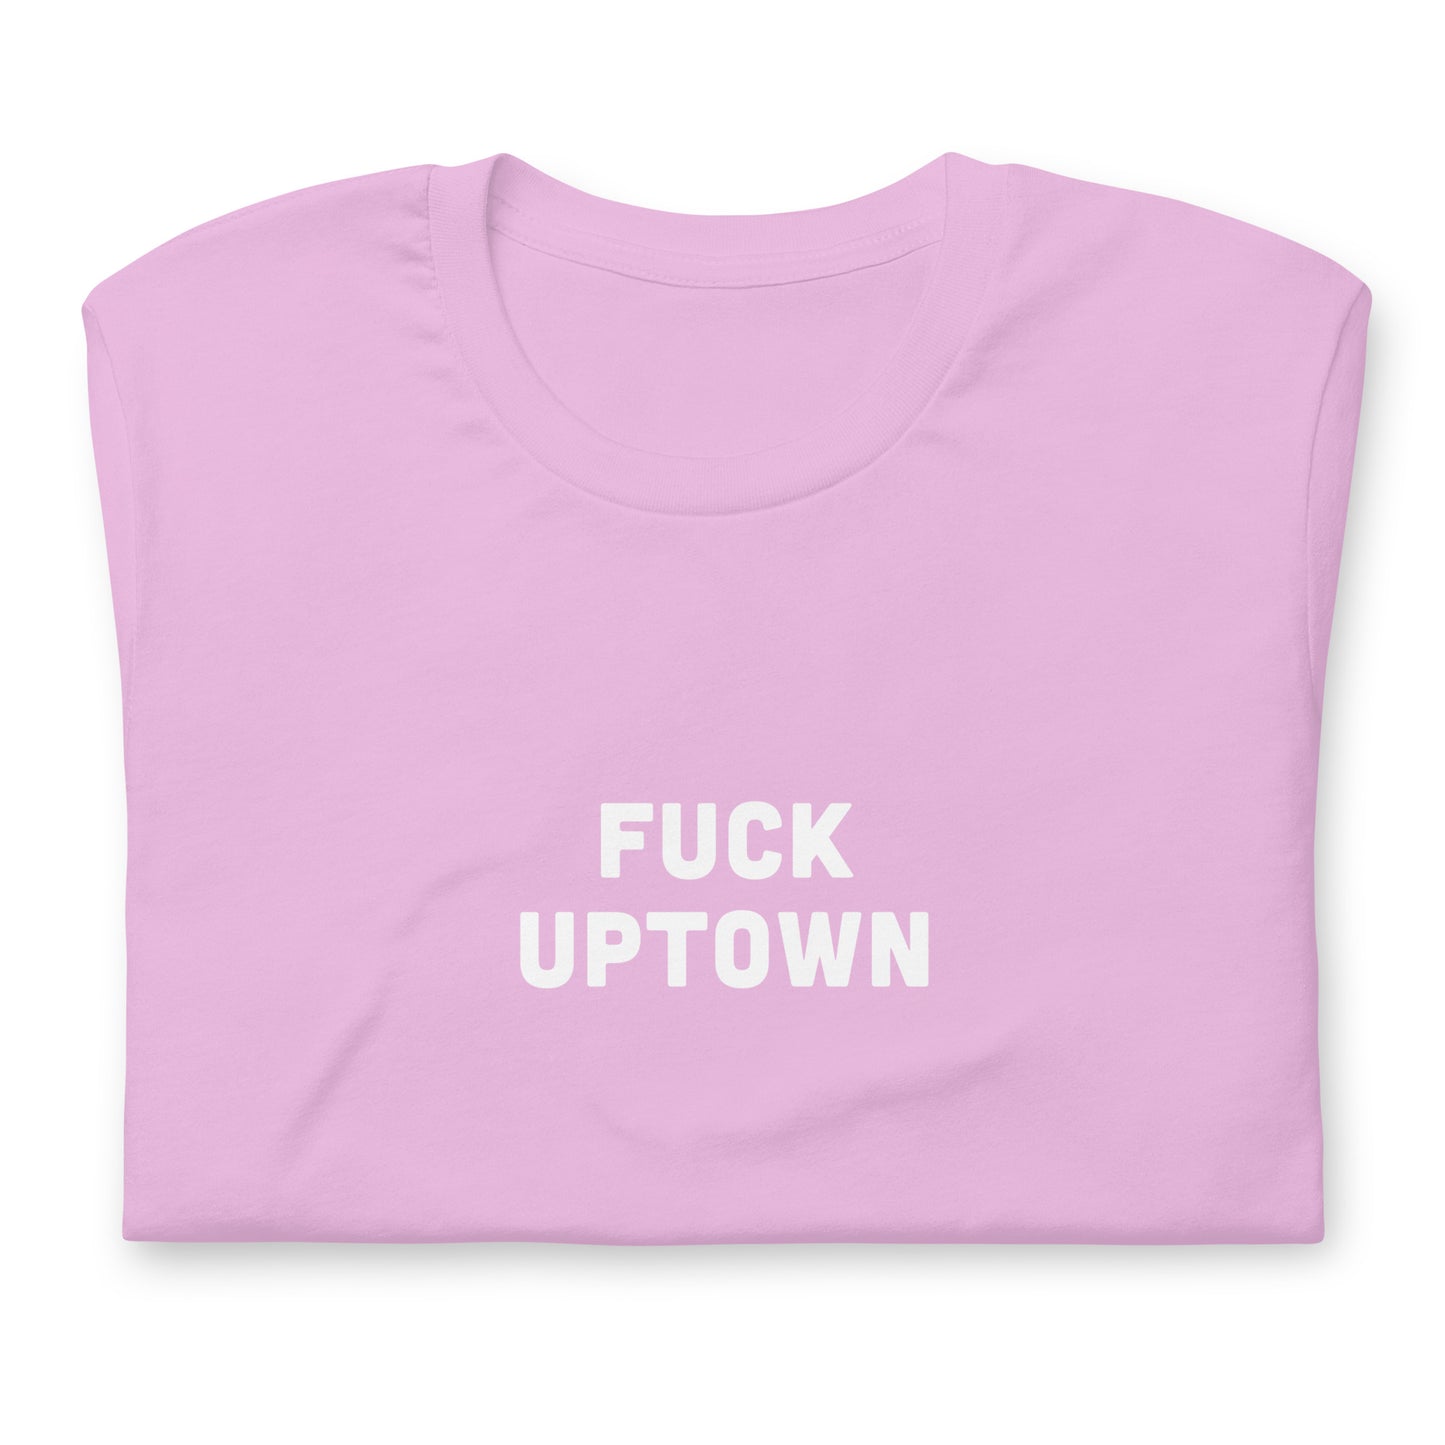 Fuck Uptown T-Shirt Size 2XL Color Forest